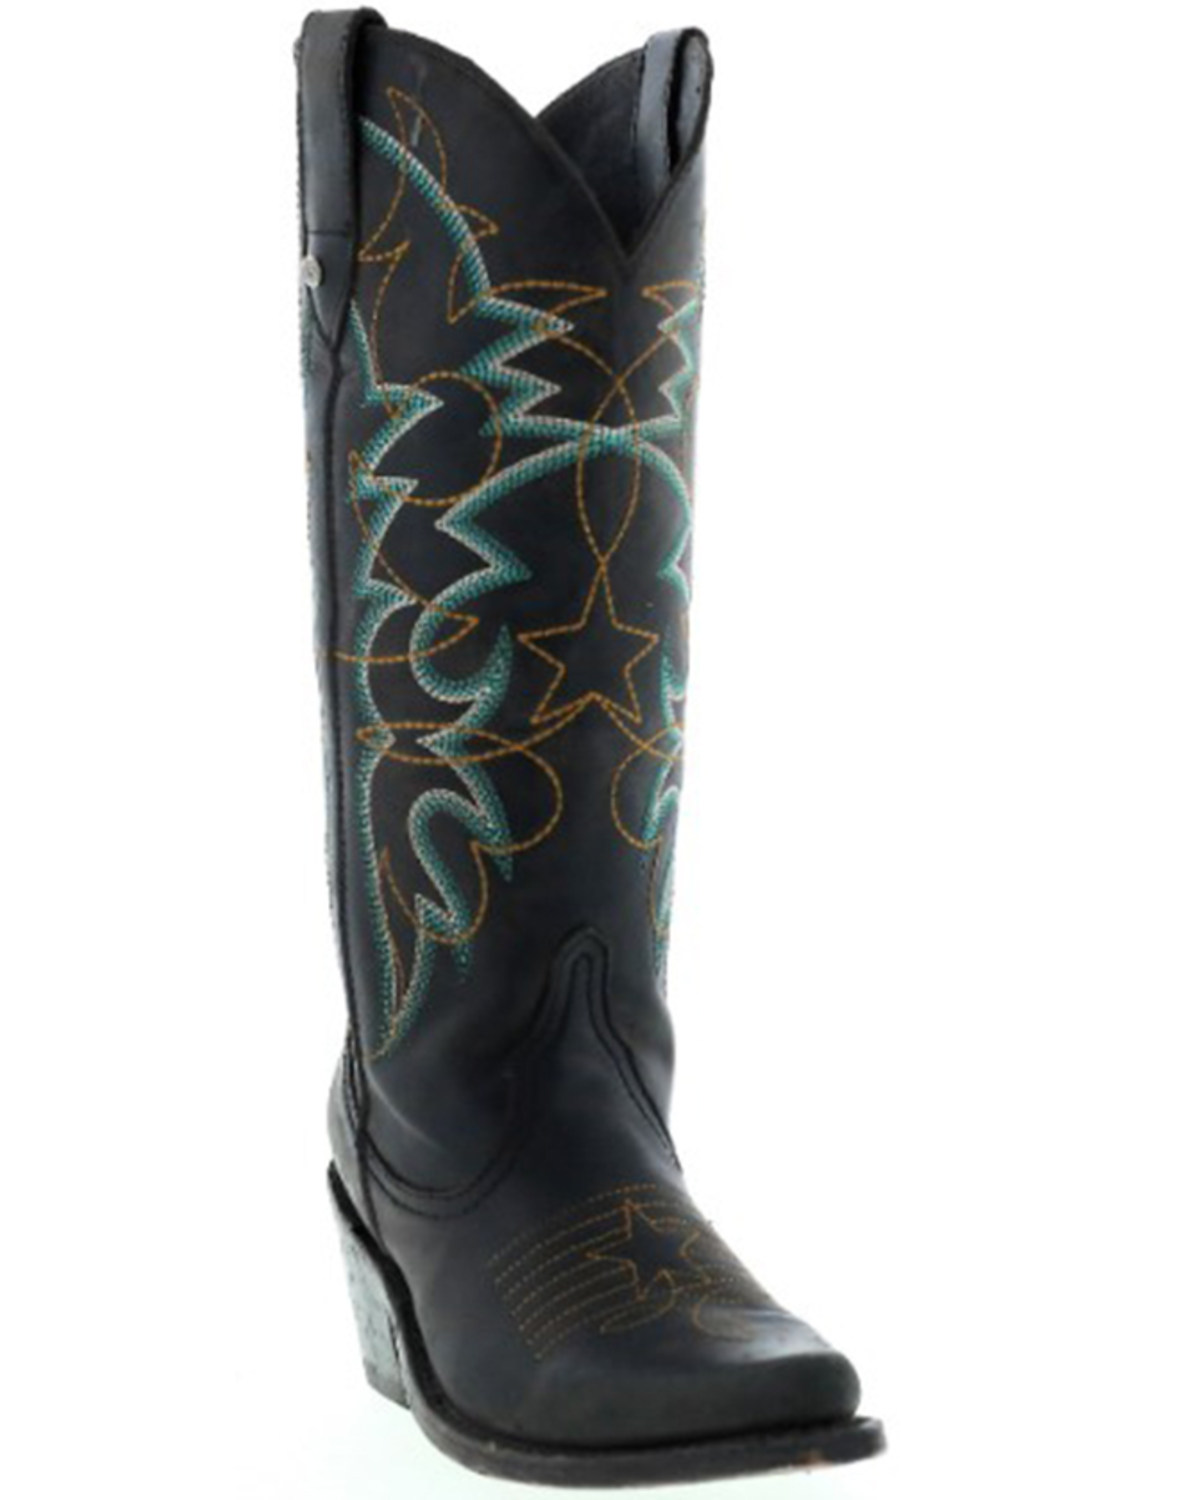 Botas Caborca for Liberty Black Women's Amelia Star Stitched Western Boots - Snip Toe